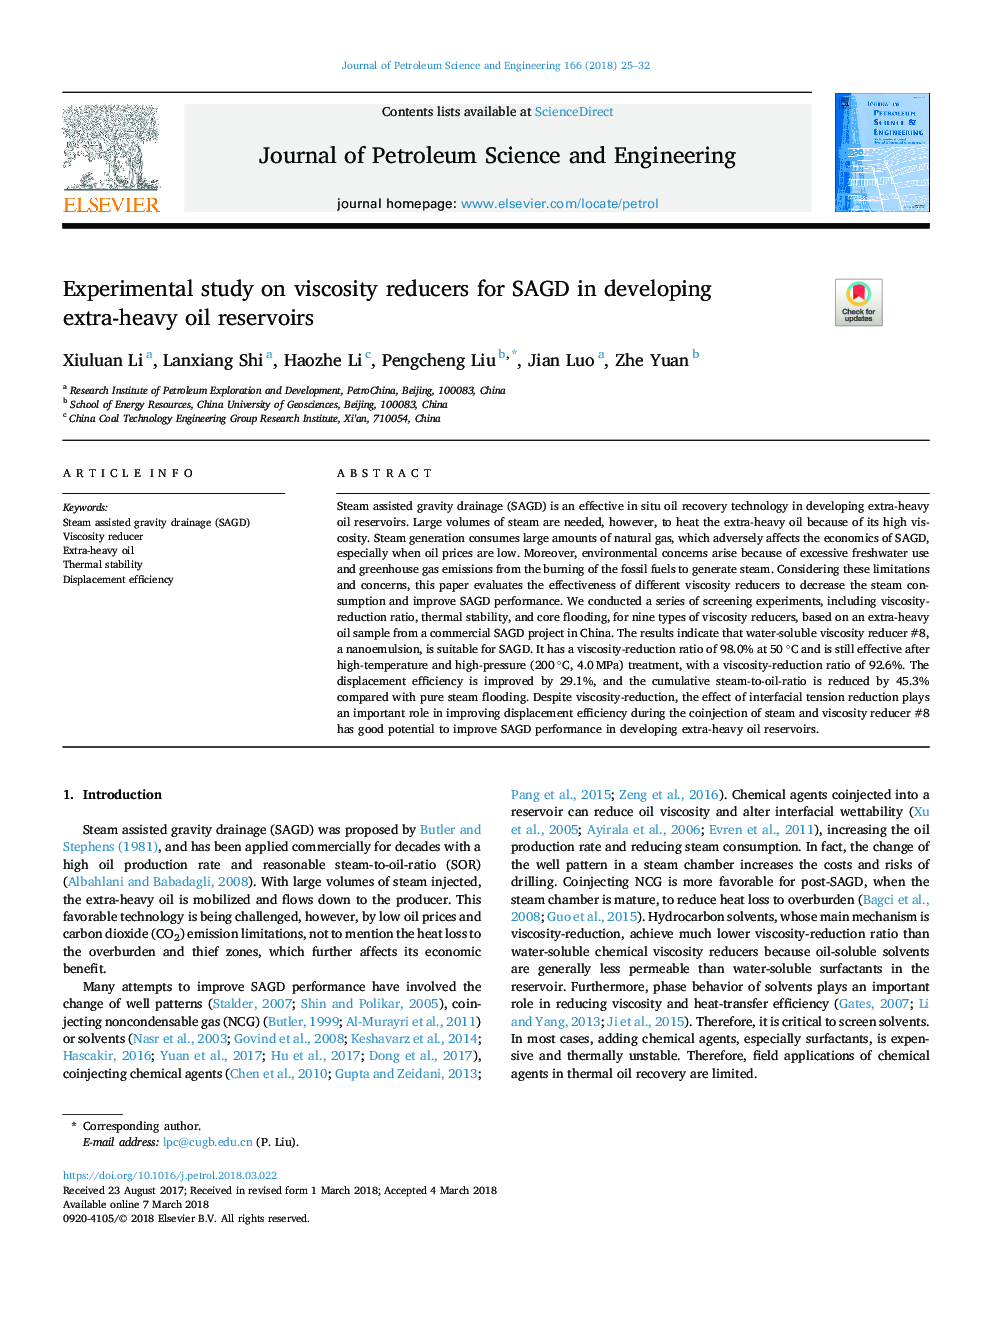 Experimental study on viscosity reducers for SAGD in developing extra-heavy oil reservoirs